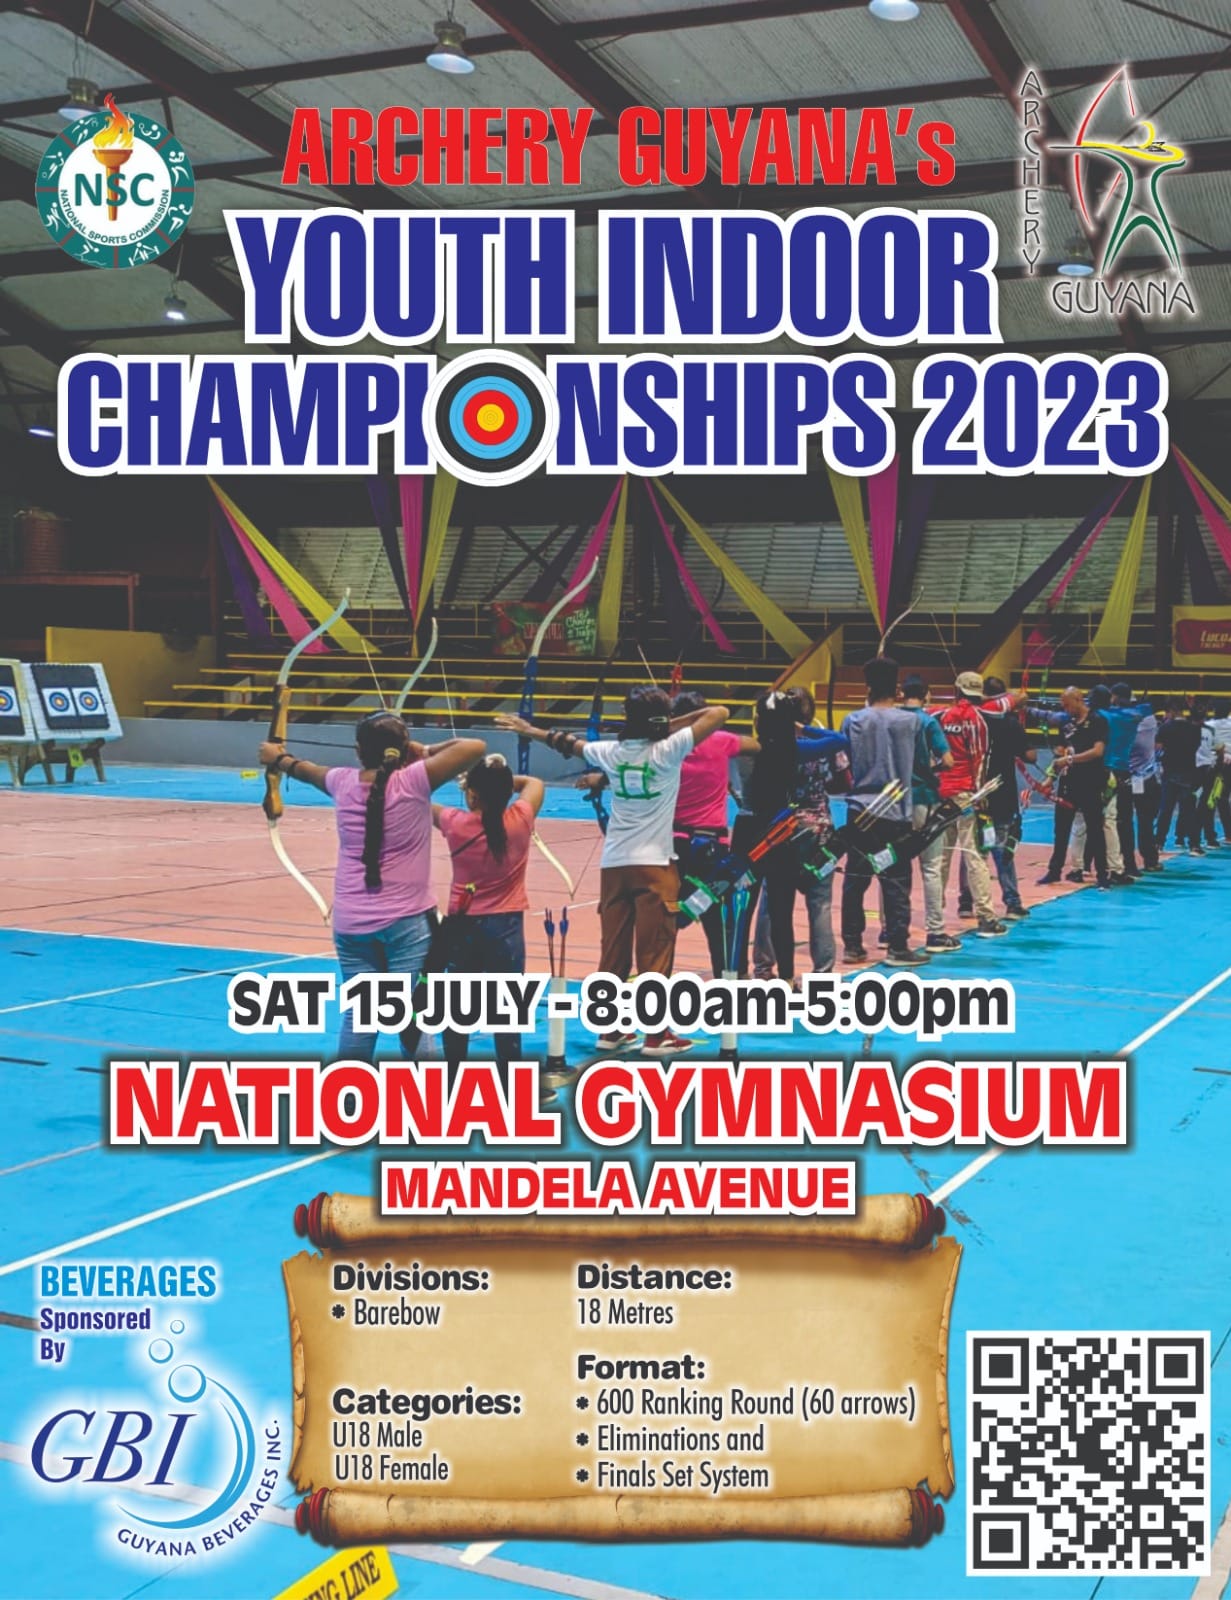 Archery Guyana's Youth Indoor Championships 2023